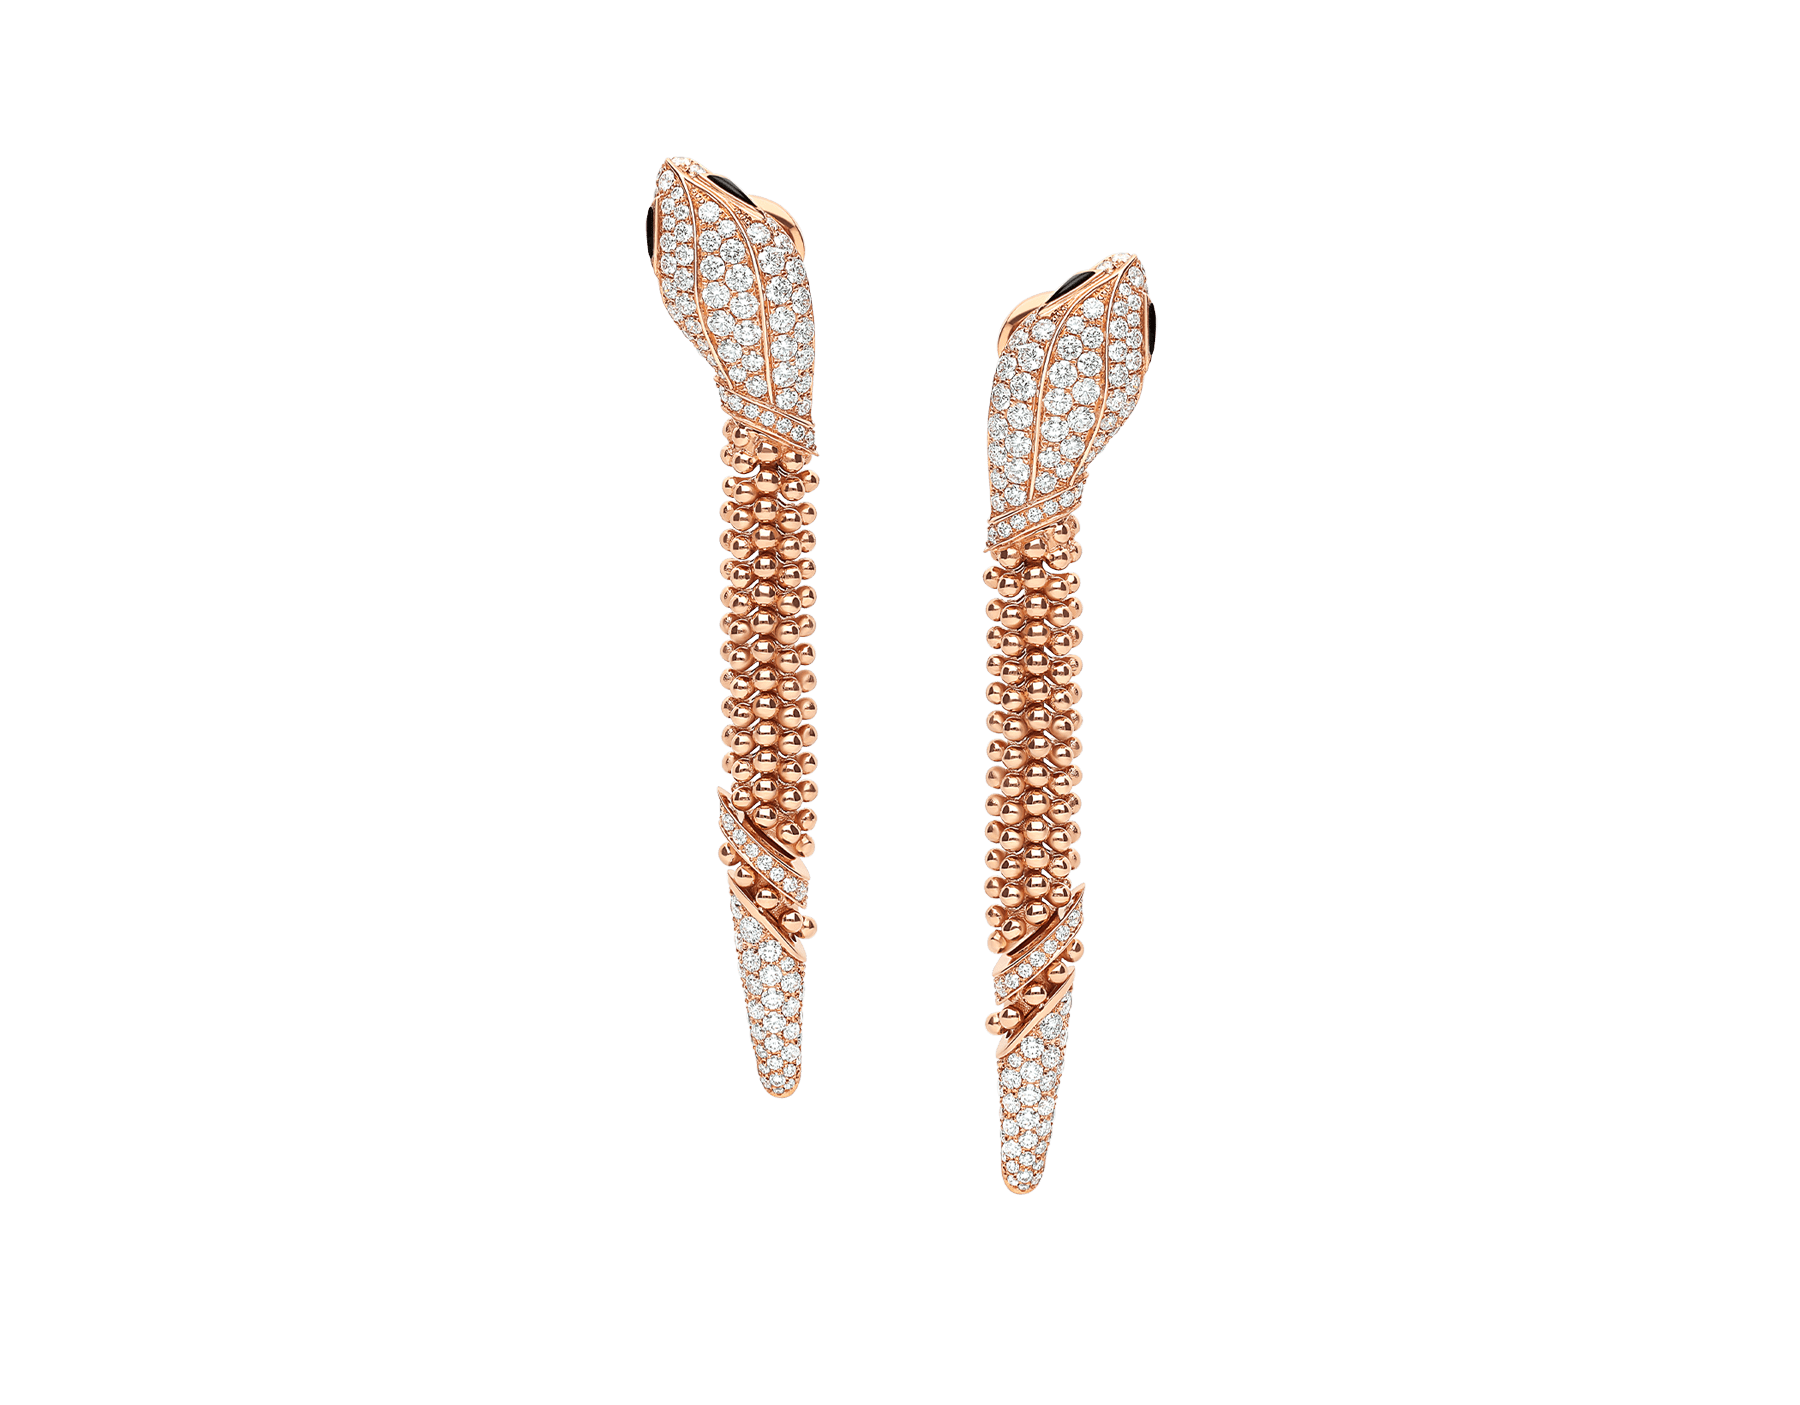 Serpenti 18 kt rose gold earrings set with pavé diamonds on the head and tail, and black onyx eyes 359387 image 1